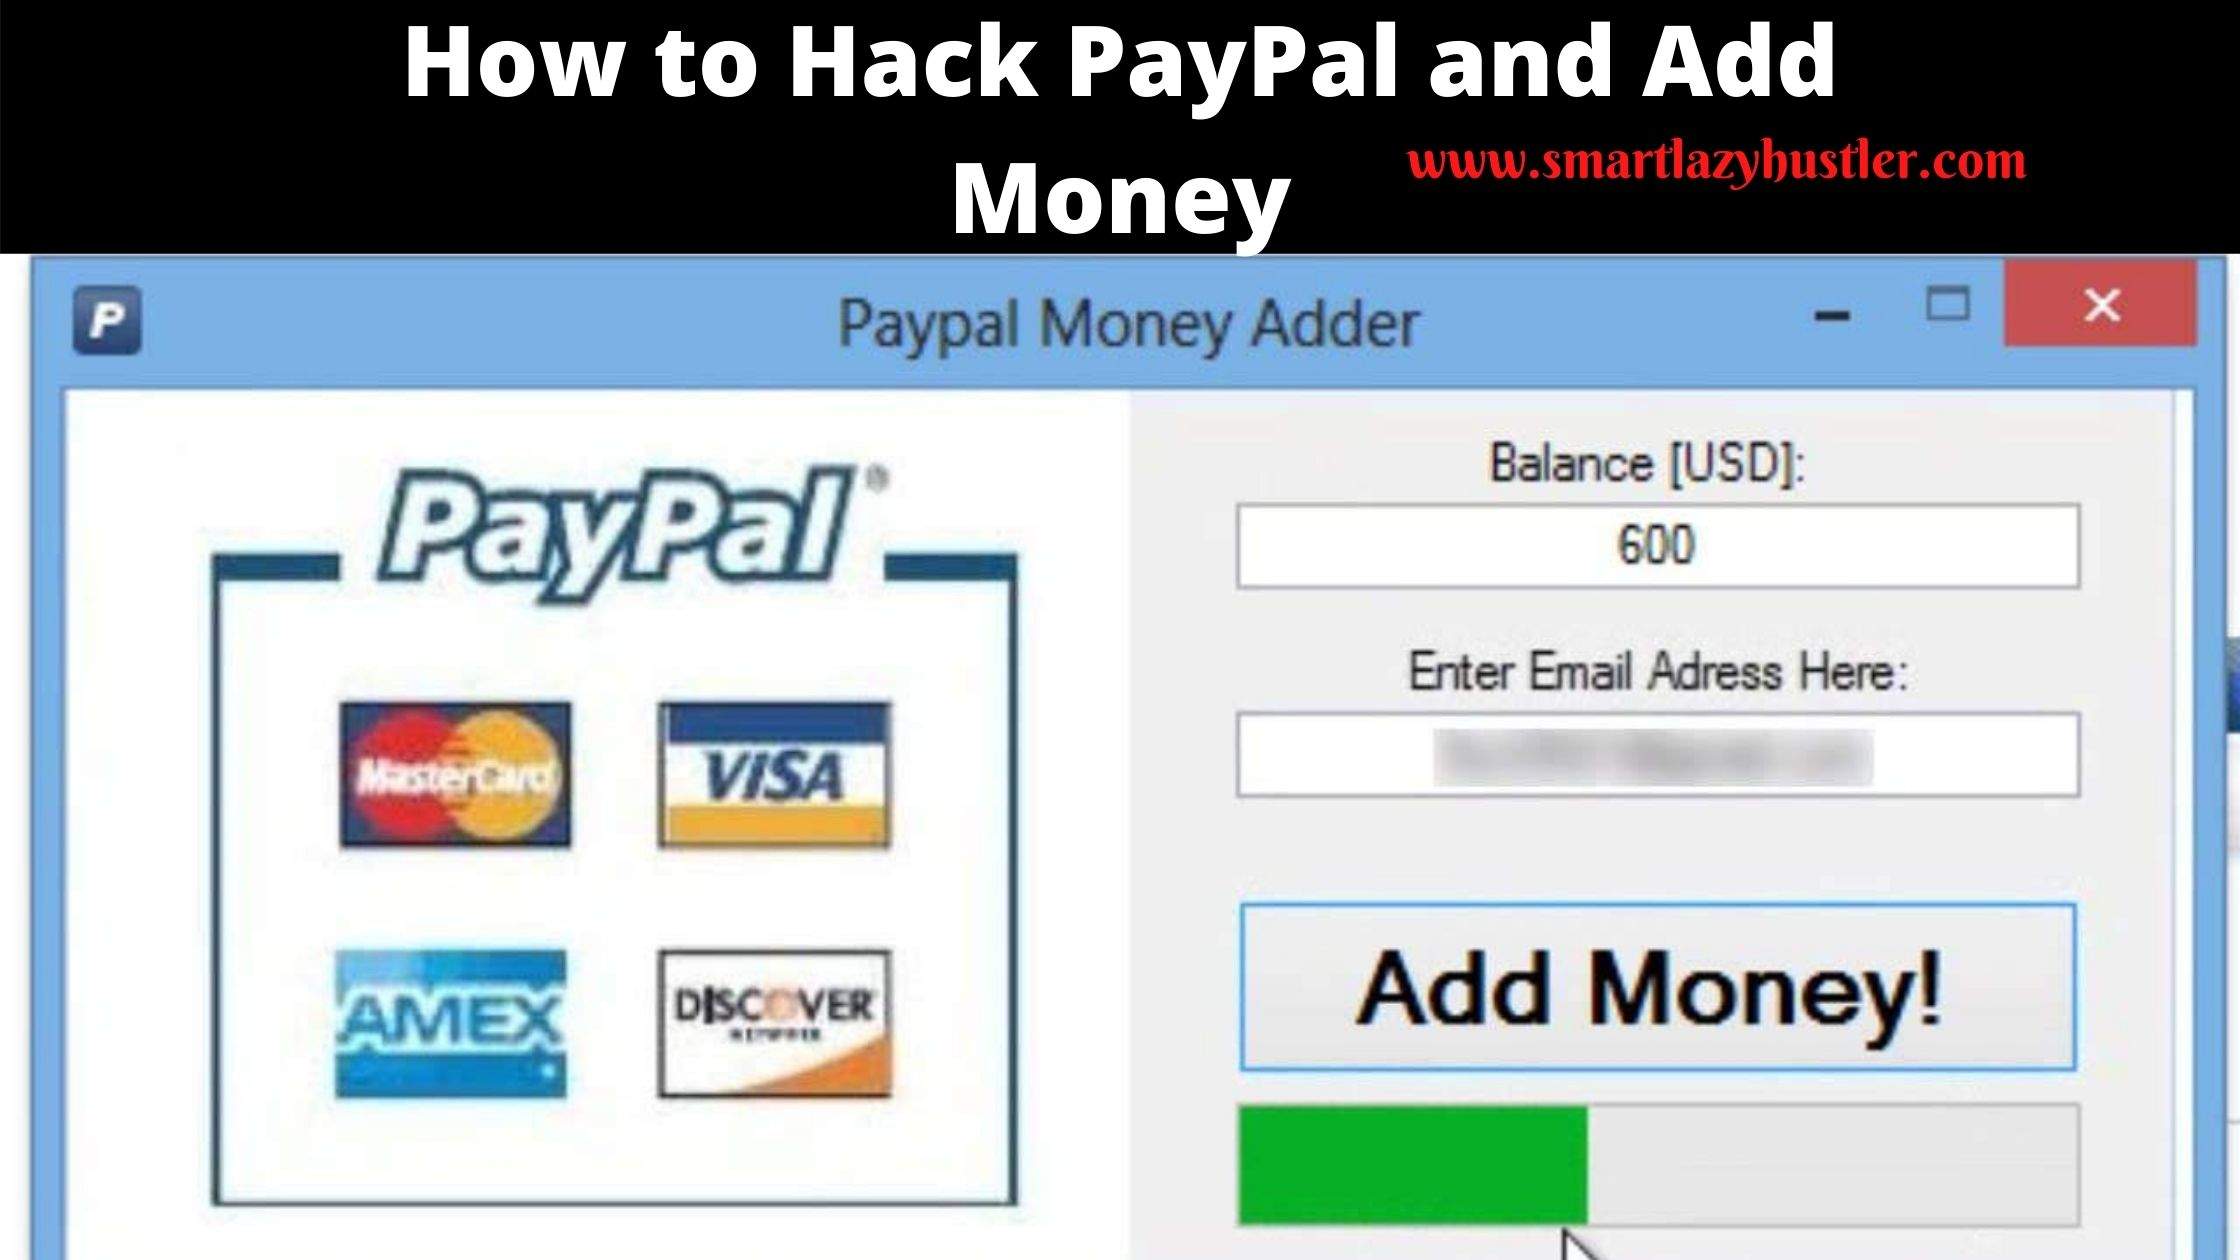 How to Hack PayPal and Add Money in Eight Steps